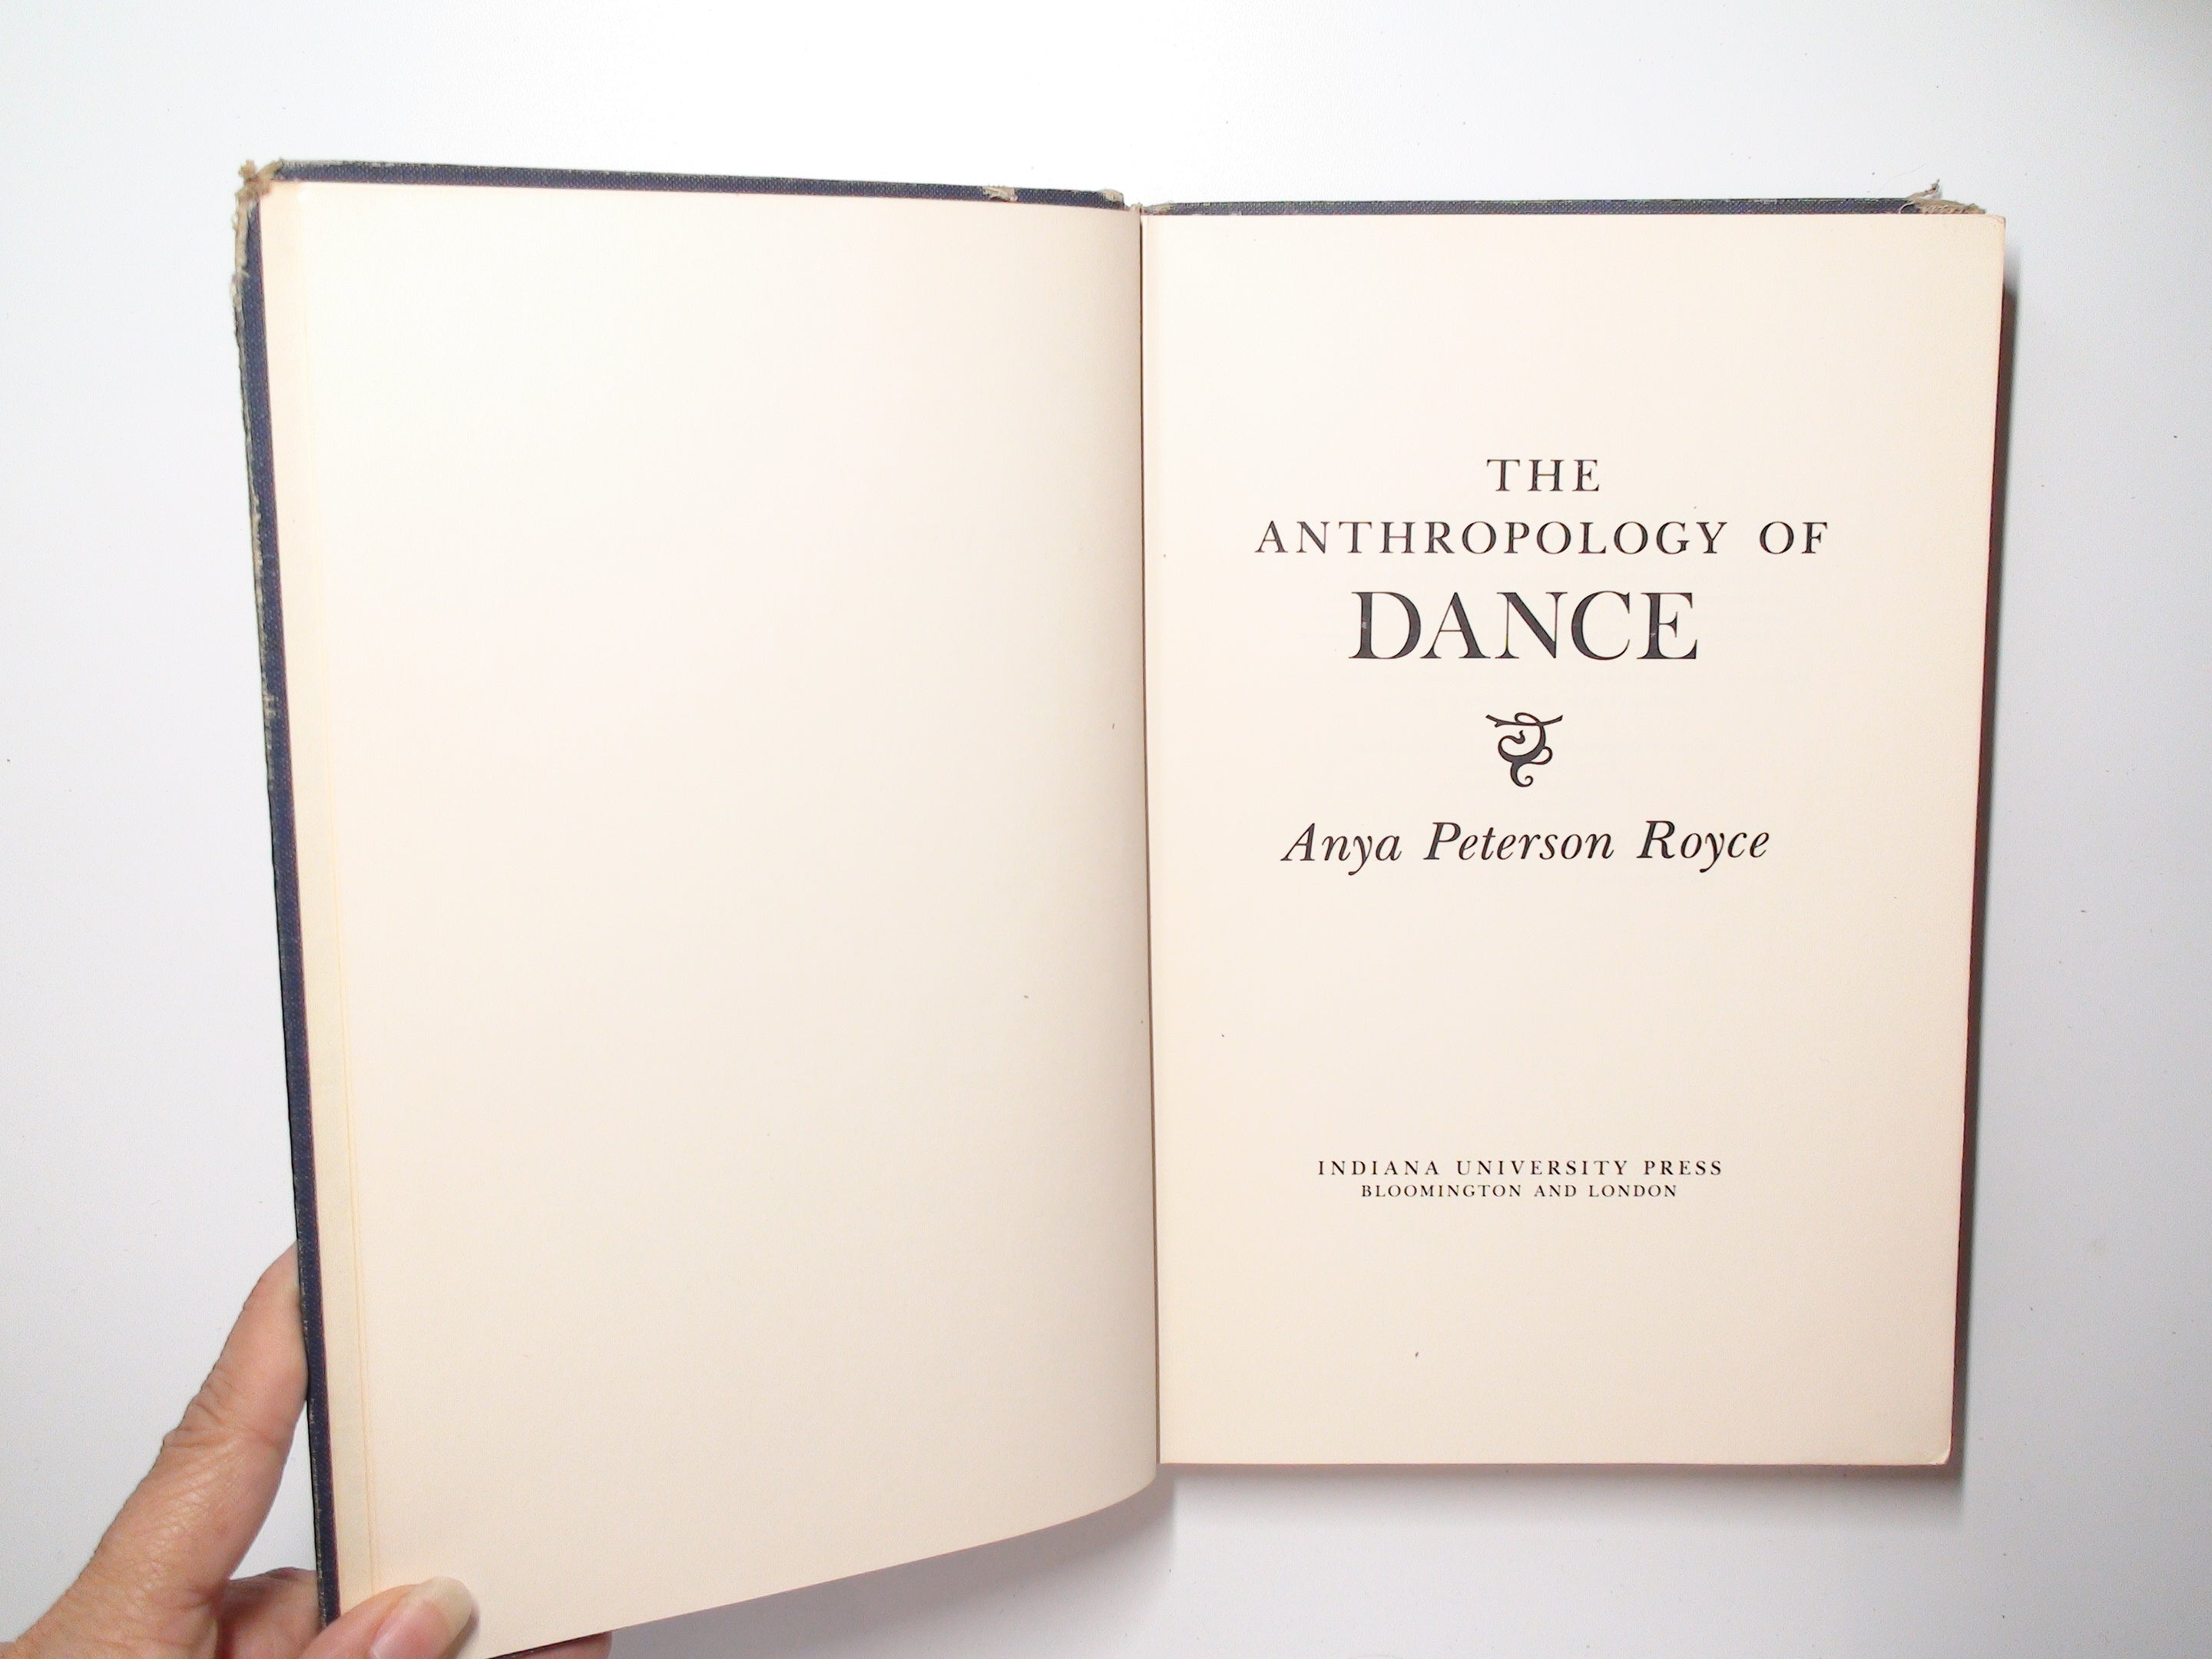 The Anthropology of Dance, by Anya Peterson Royce, Illustrated, 1977